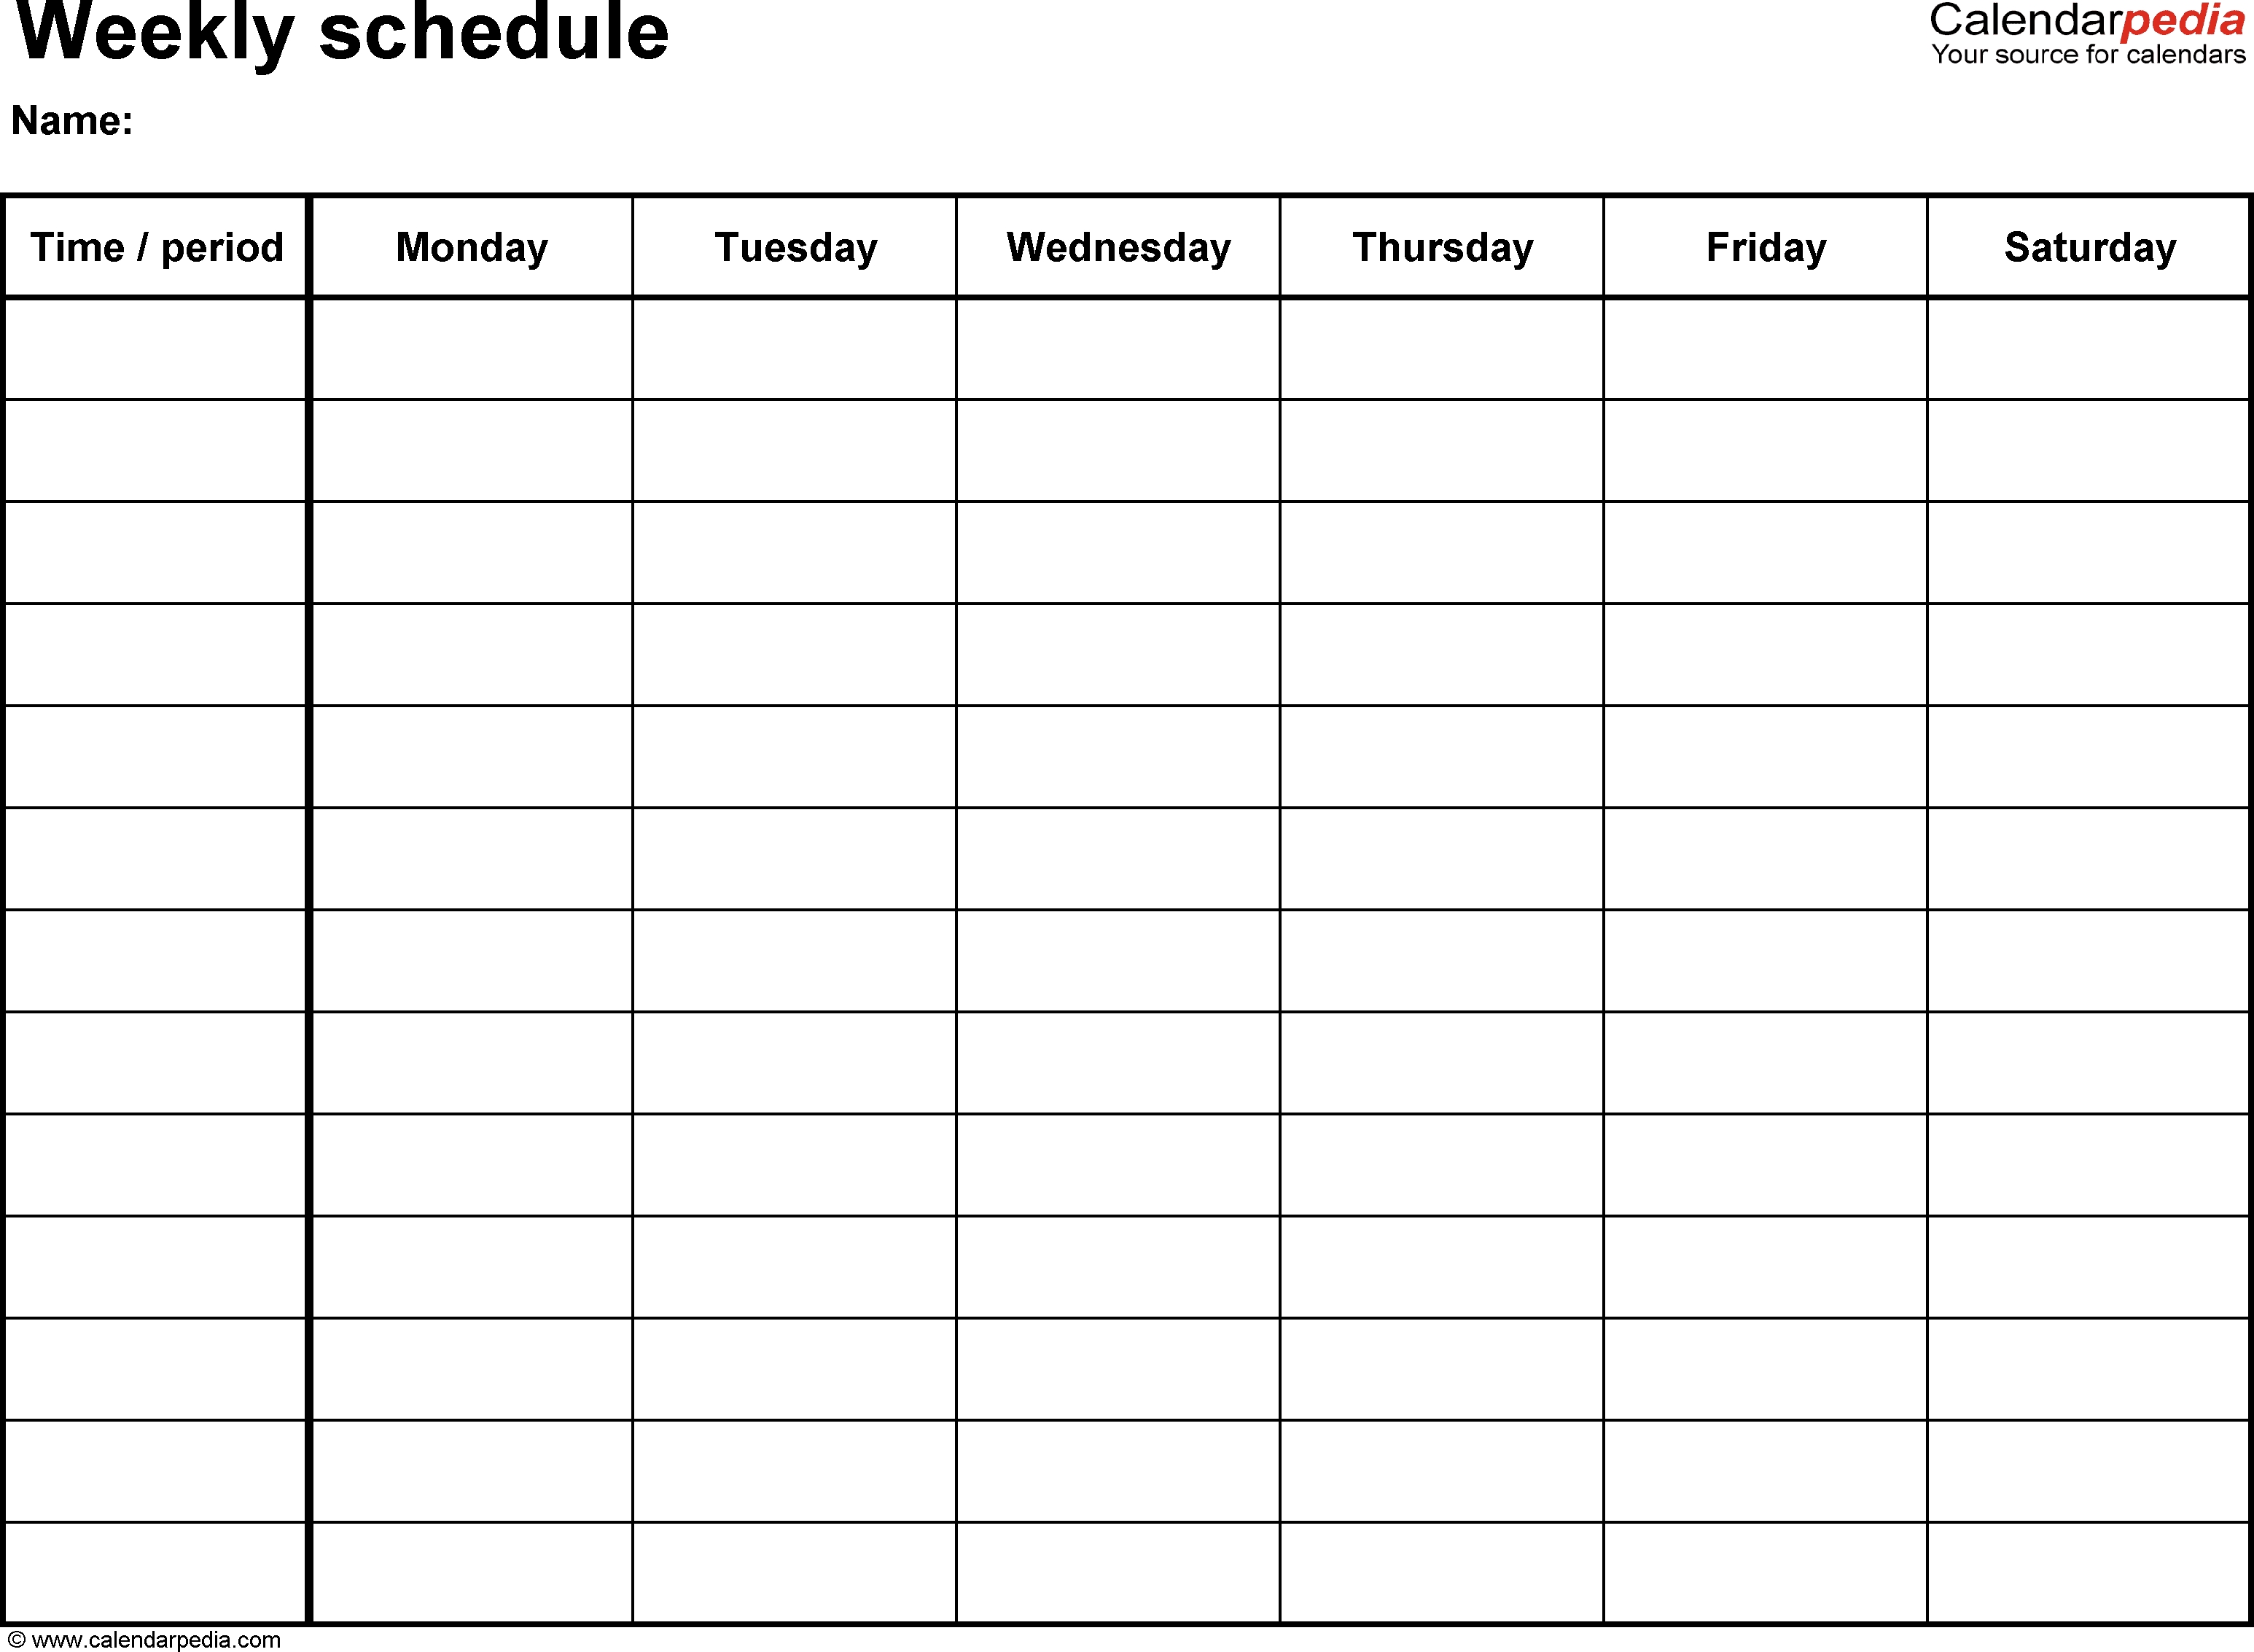 Free Weekly Schedule Templates For Pdf - 18 Templates  Printable Monthly Organiser Pages Monday To Sunday